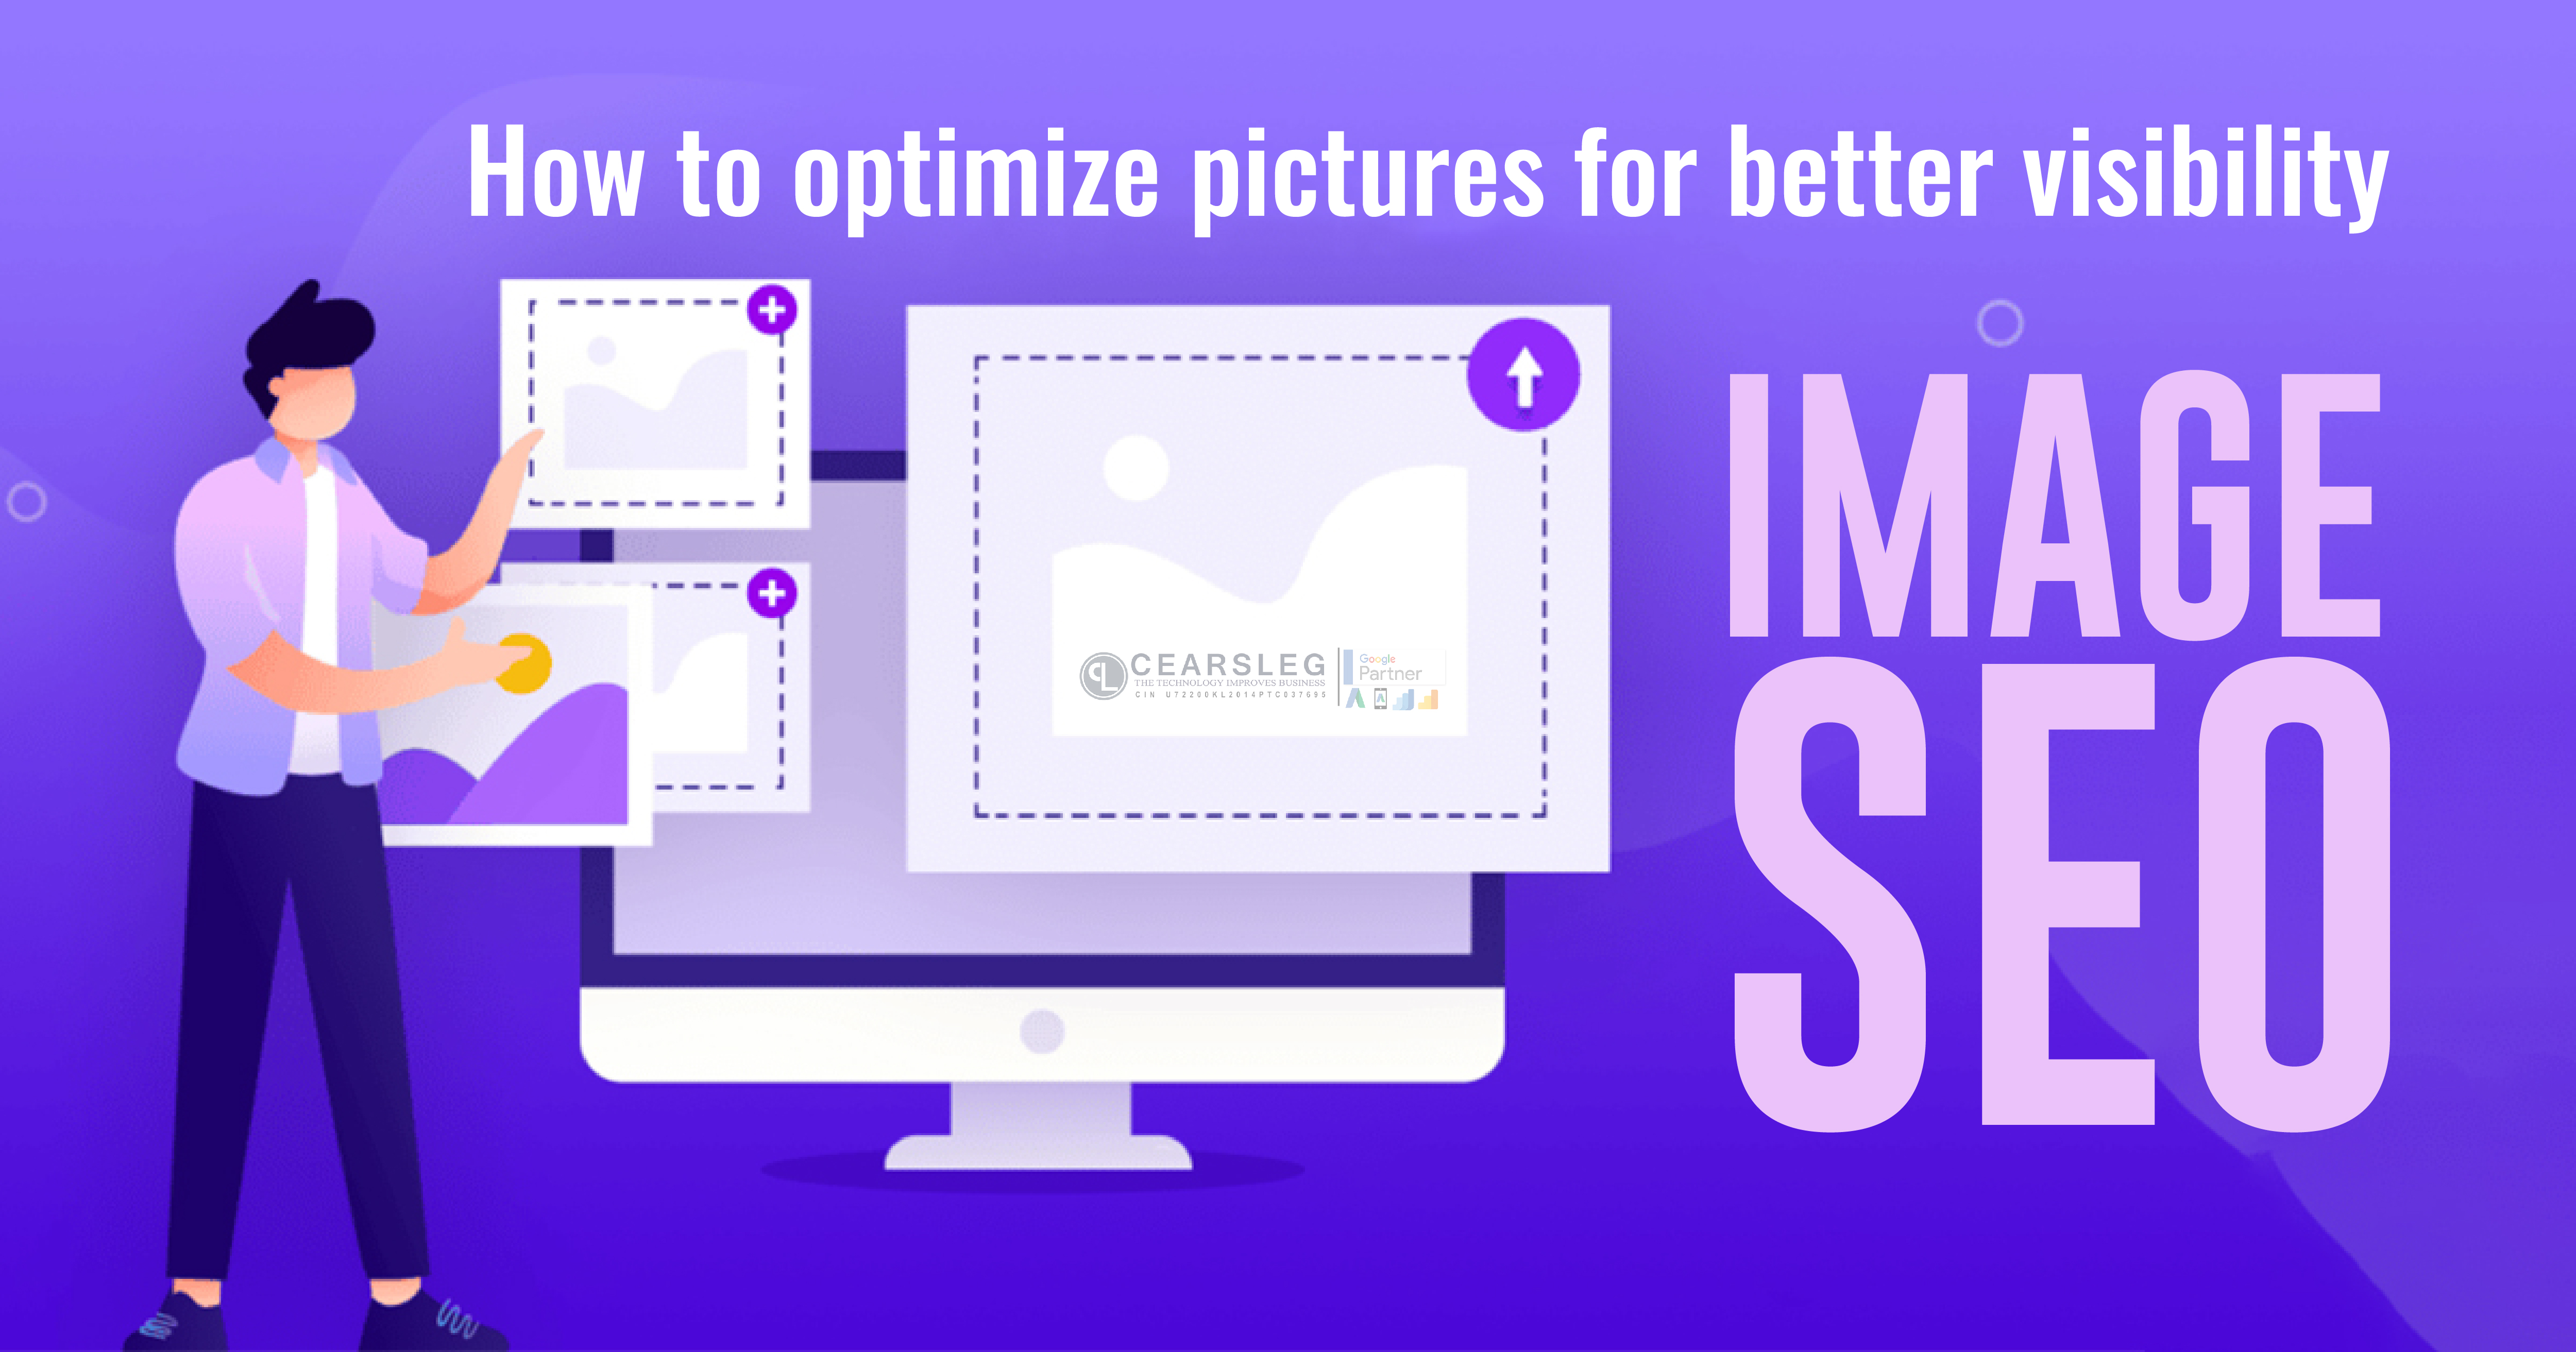 Image SEO: How to optimize pictures for better visibility